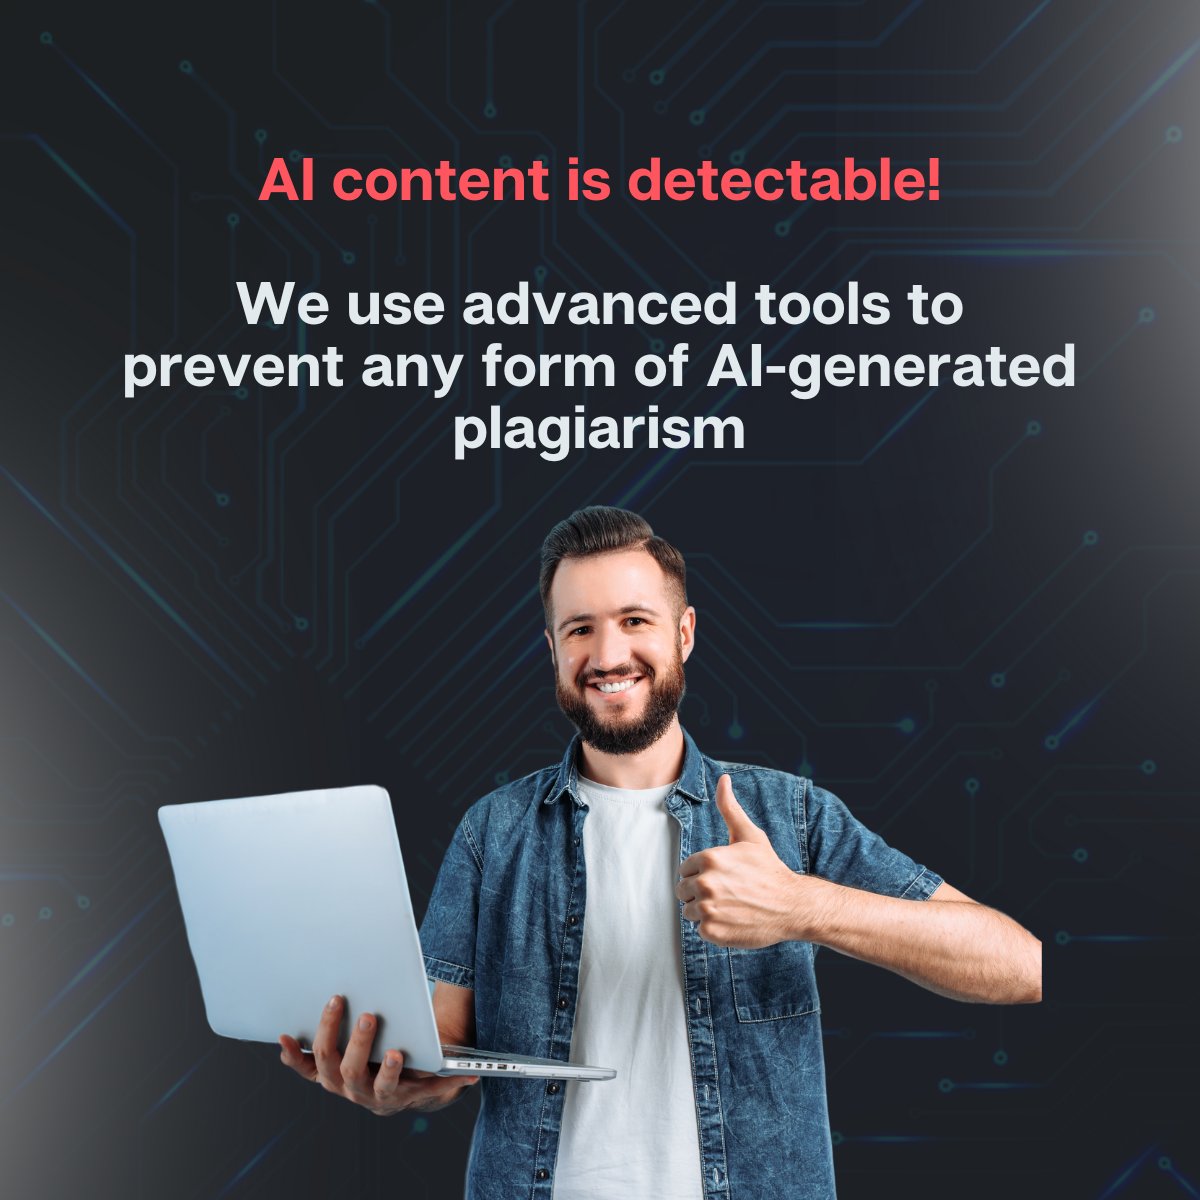 46% of high schoolers are using AI tools for school tasks per ACT Inc. report.

With AI becoming more prevalent, Skyline Academic stays ahead by detecting AI usage to ensure fair assessment and genuine learning.

#EdTech #AIinEducation